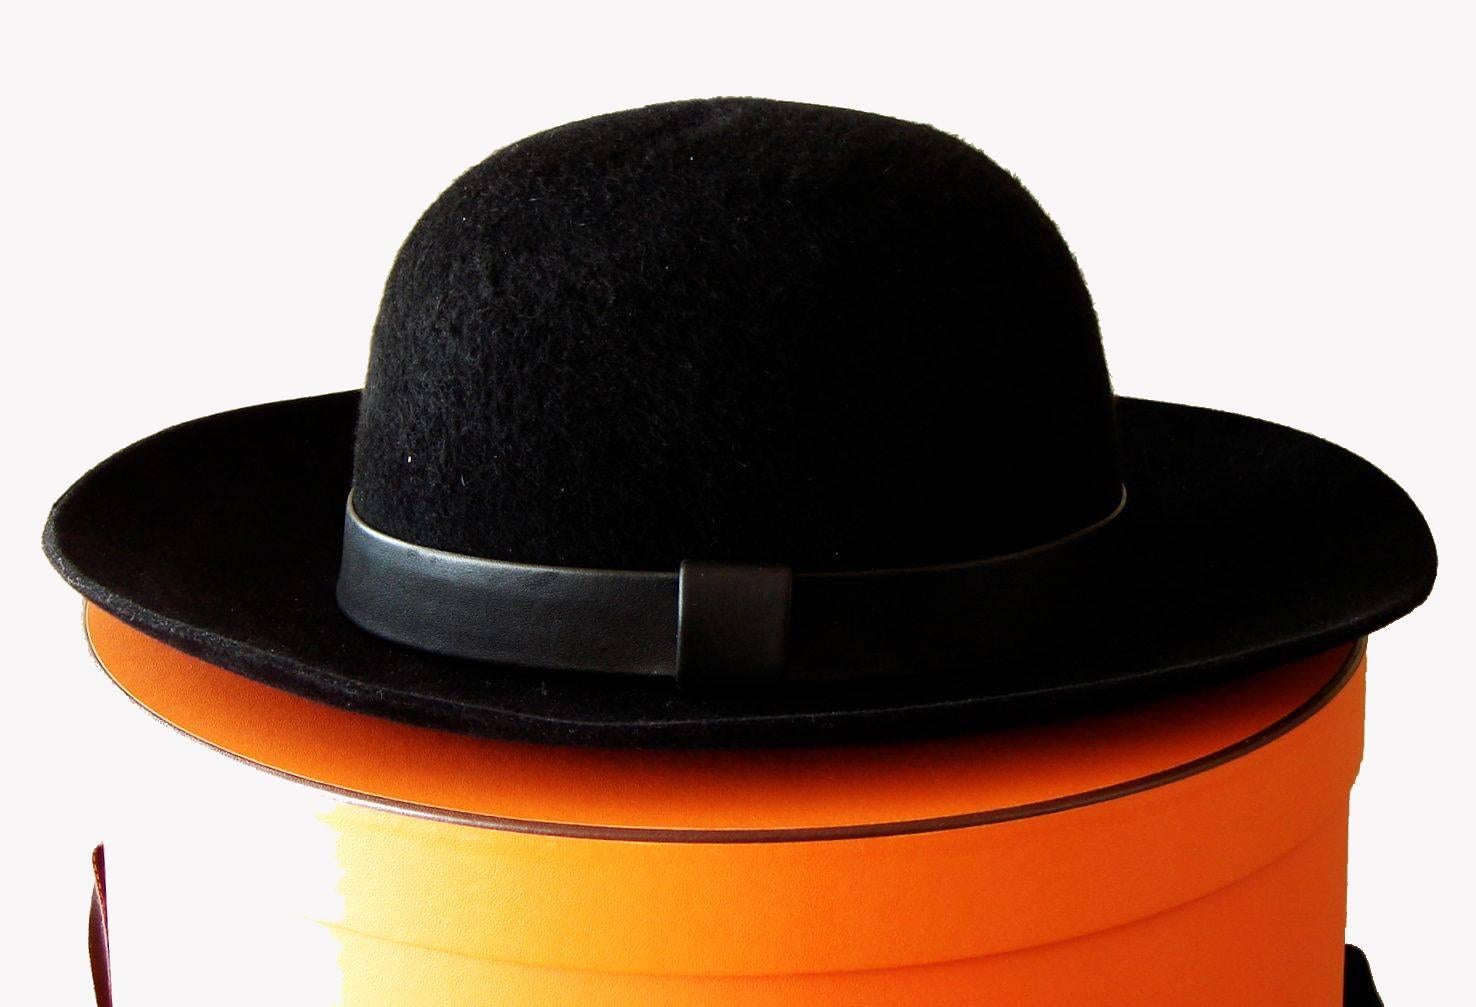 Here's a rare and downright GORGEOUS wide brim hat from HERMES!!
Made from supple black rabbit felt in a plush finish, it features a black leather band around the crown! Comes with its original tag, and in it's oval hat box with ribbon for safe